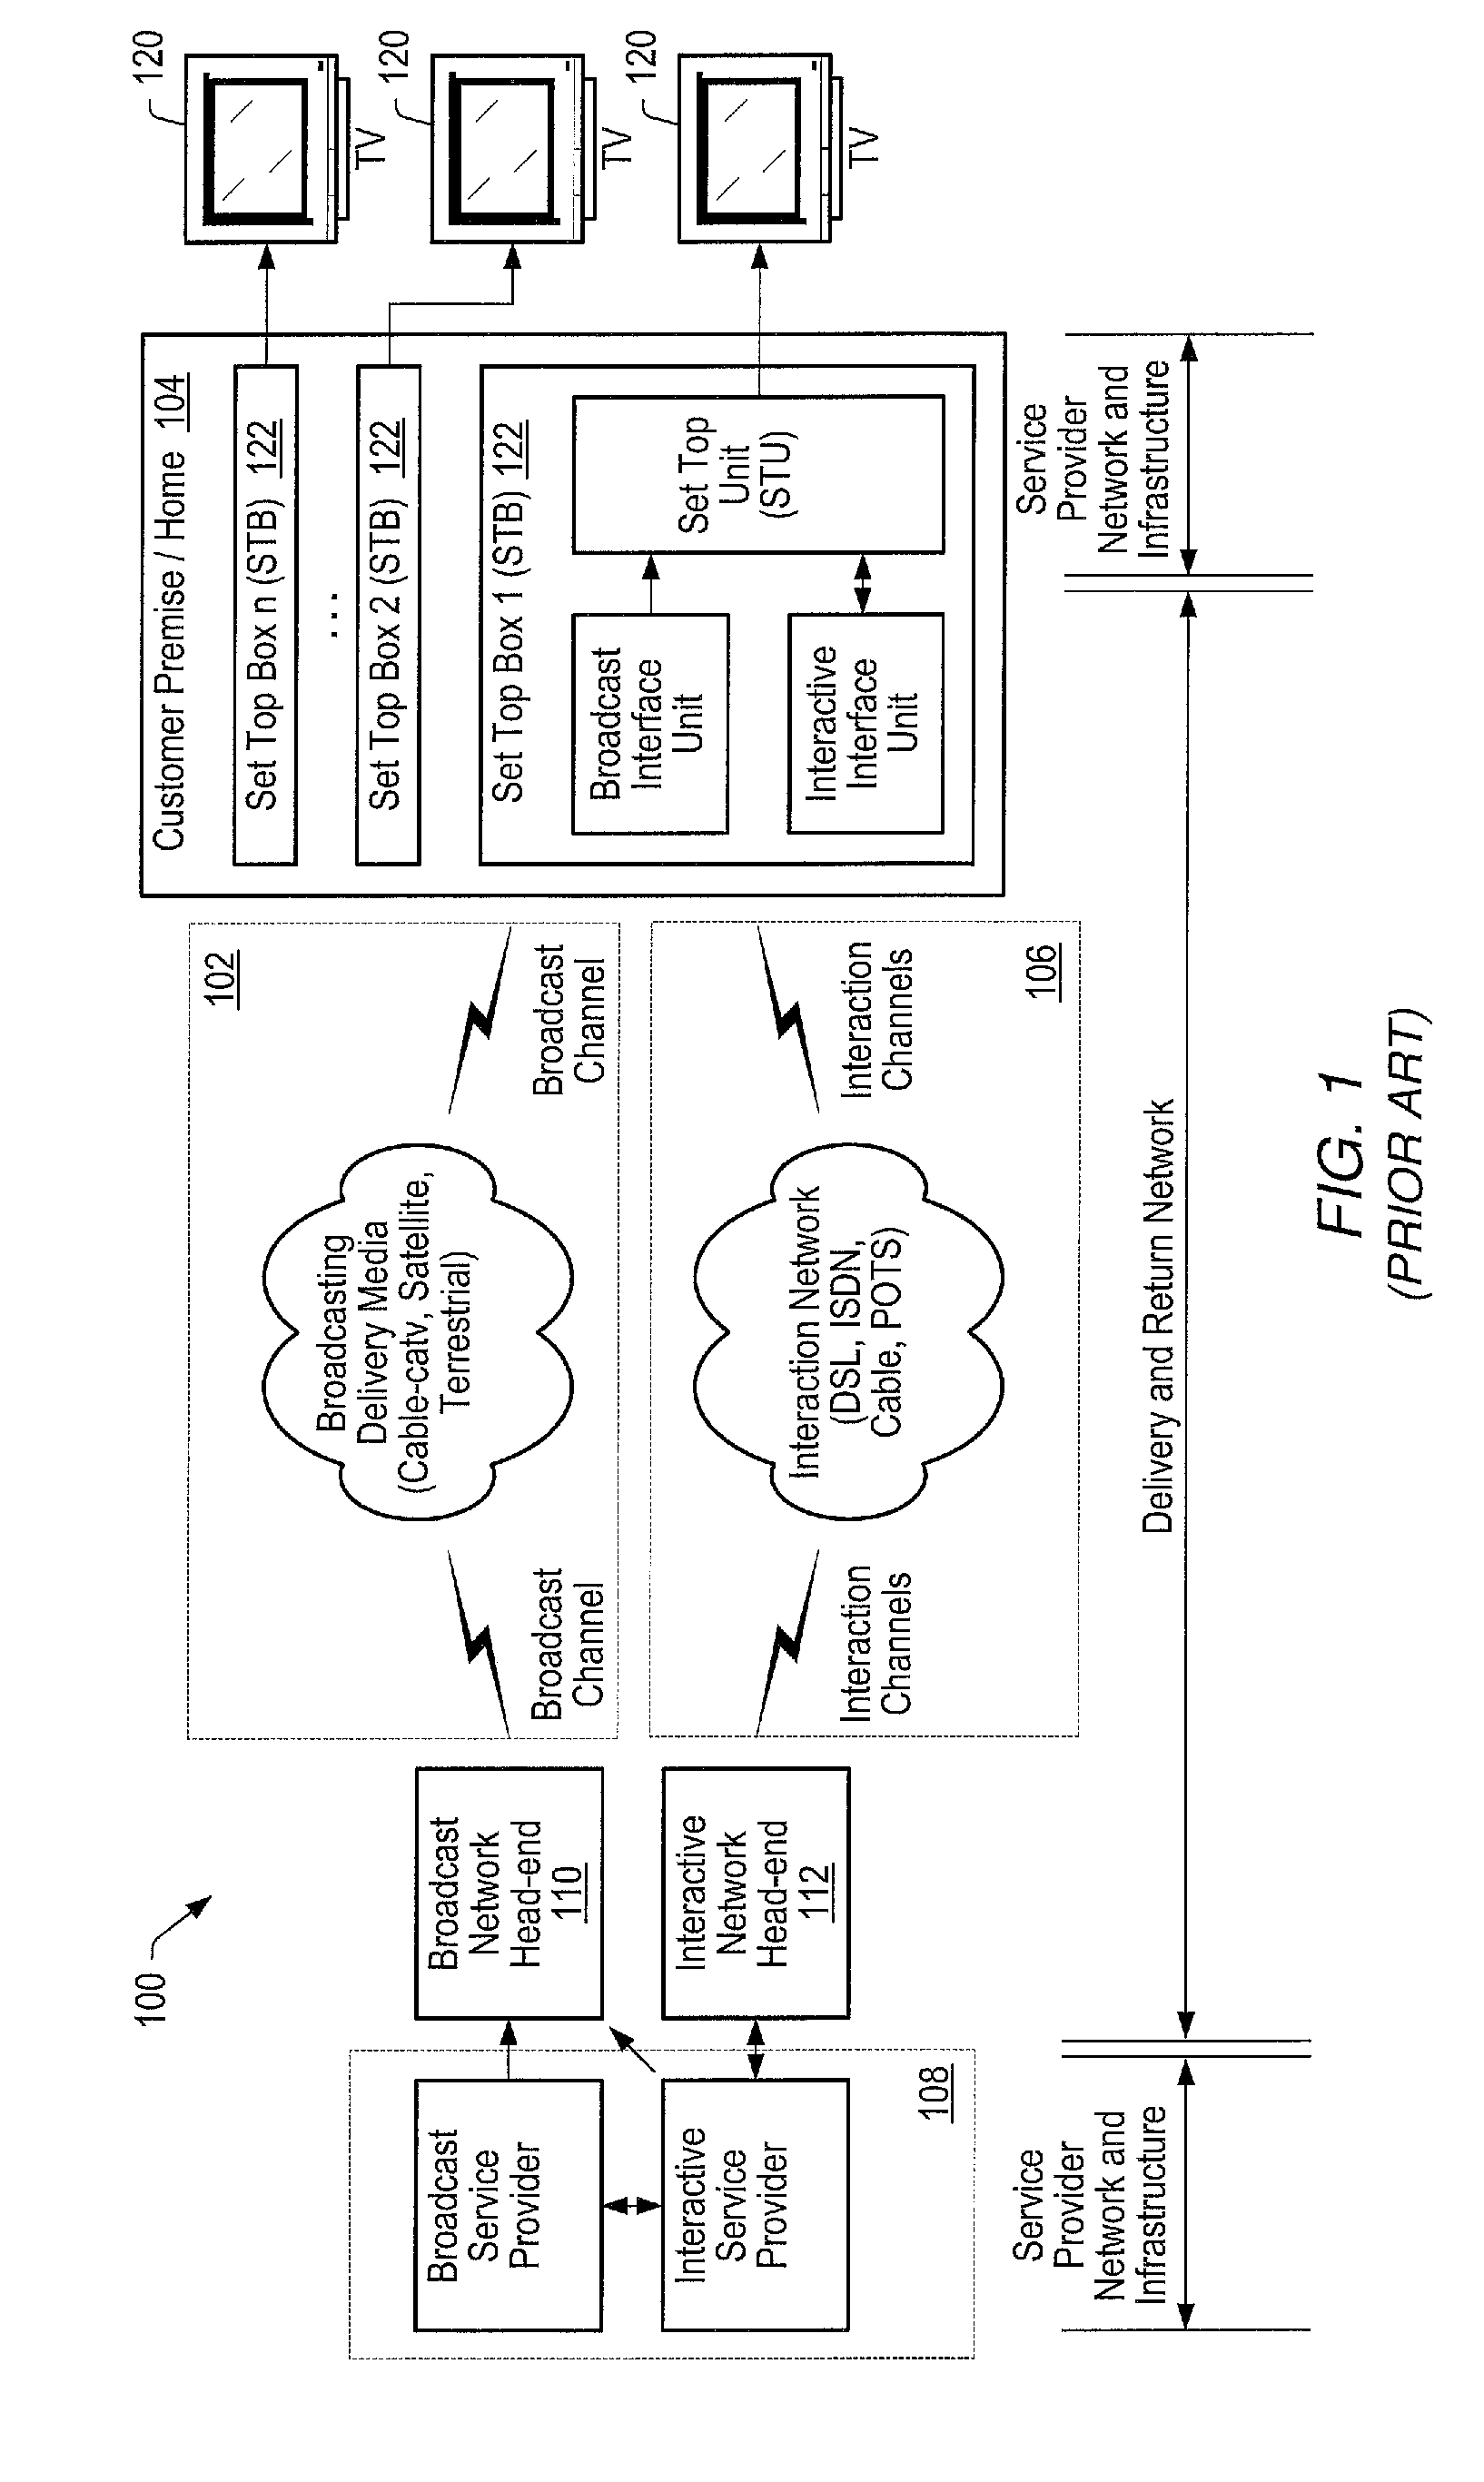 High Speed Ethernet MAC and PHY Apparatus with a Filter Based Ethernet Packet Router with Priority Queuing and Single or Multiple Transport Stream Interfaces